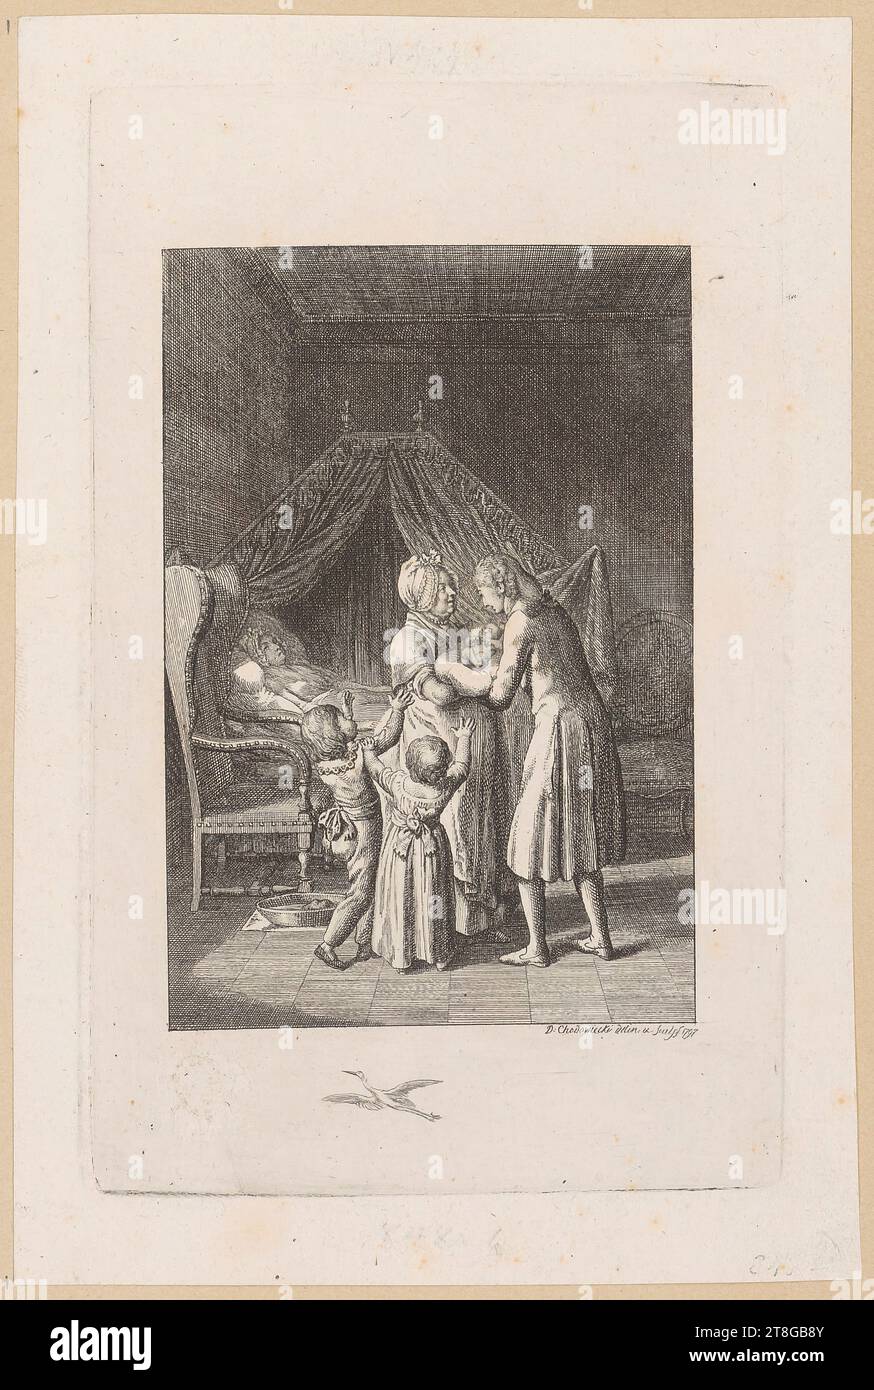 Daniel Nikolaus Chodowiecki (1726 - 1801), Artist, Grateful Memory Those Left Behind, Daniel Nikolaus Chodowiecki (1726 - 1801), Artist, Joy over the New Arrival Childbed, Print medium creation: 1797, Etching on wove paper (papier vélin), Sheet size: 17.1 x 11.5 cm Plate margin: 14.9 x 8.3 cm, Signed and dated at lower right 'D: Chodowiecki delineavit: & sculpsit: 1797', Verso lower right red Stock Photo